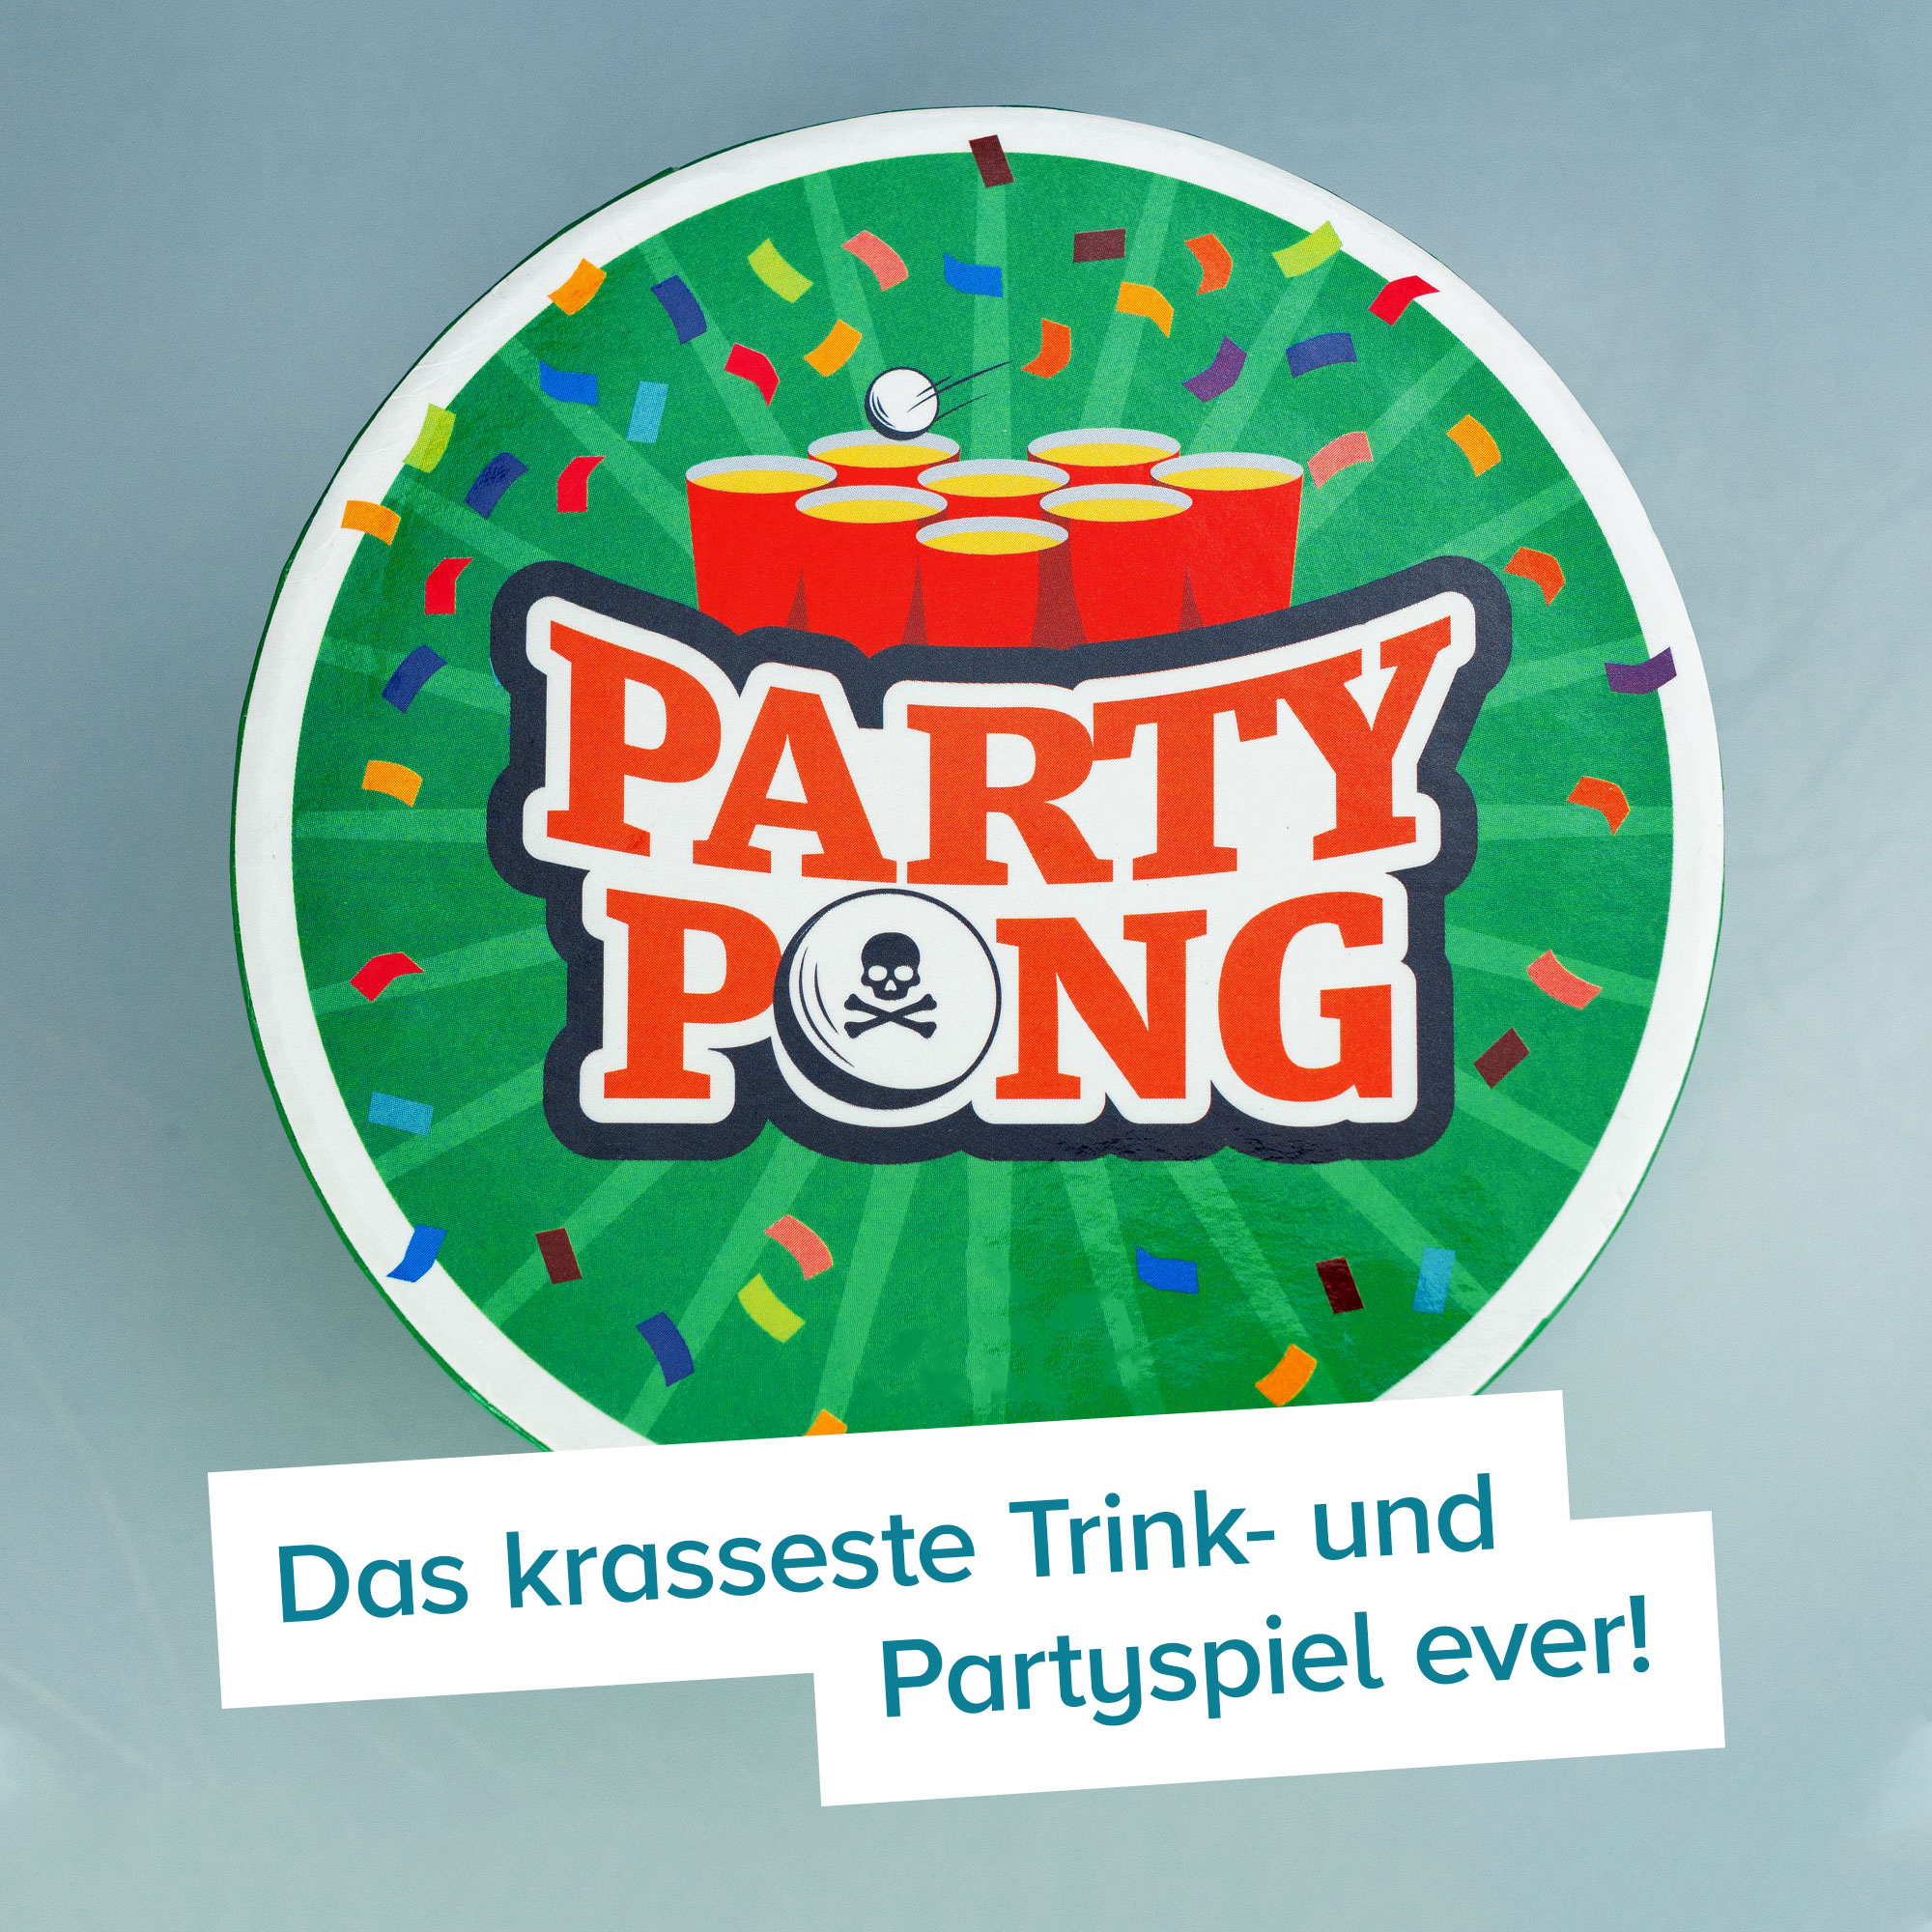 Partypong - Partygame